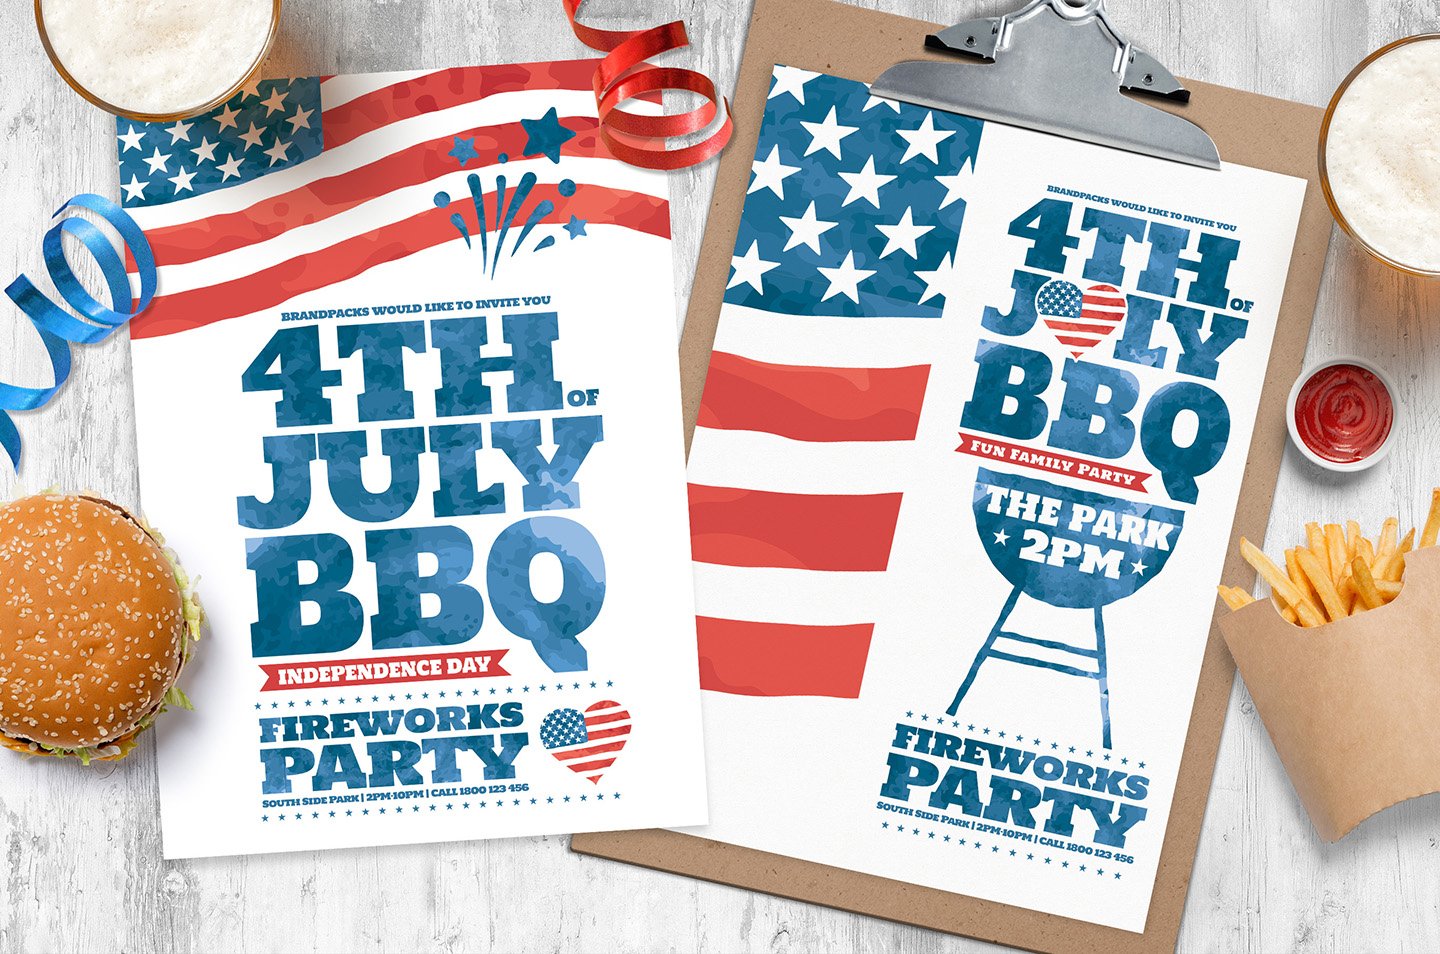 4th of July Flyer Templates cover image.